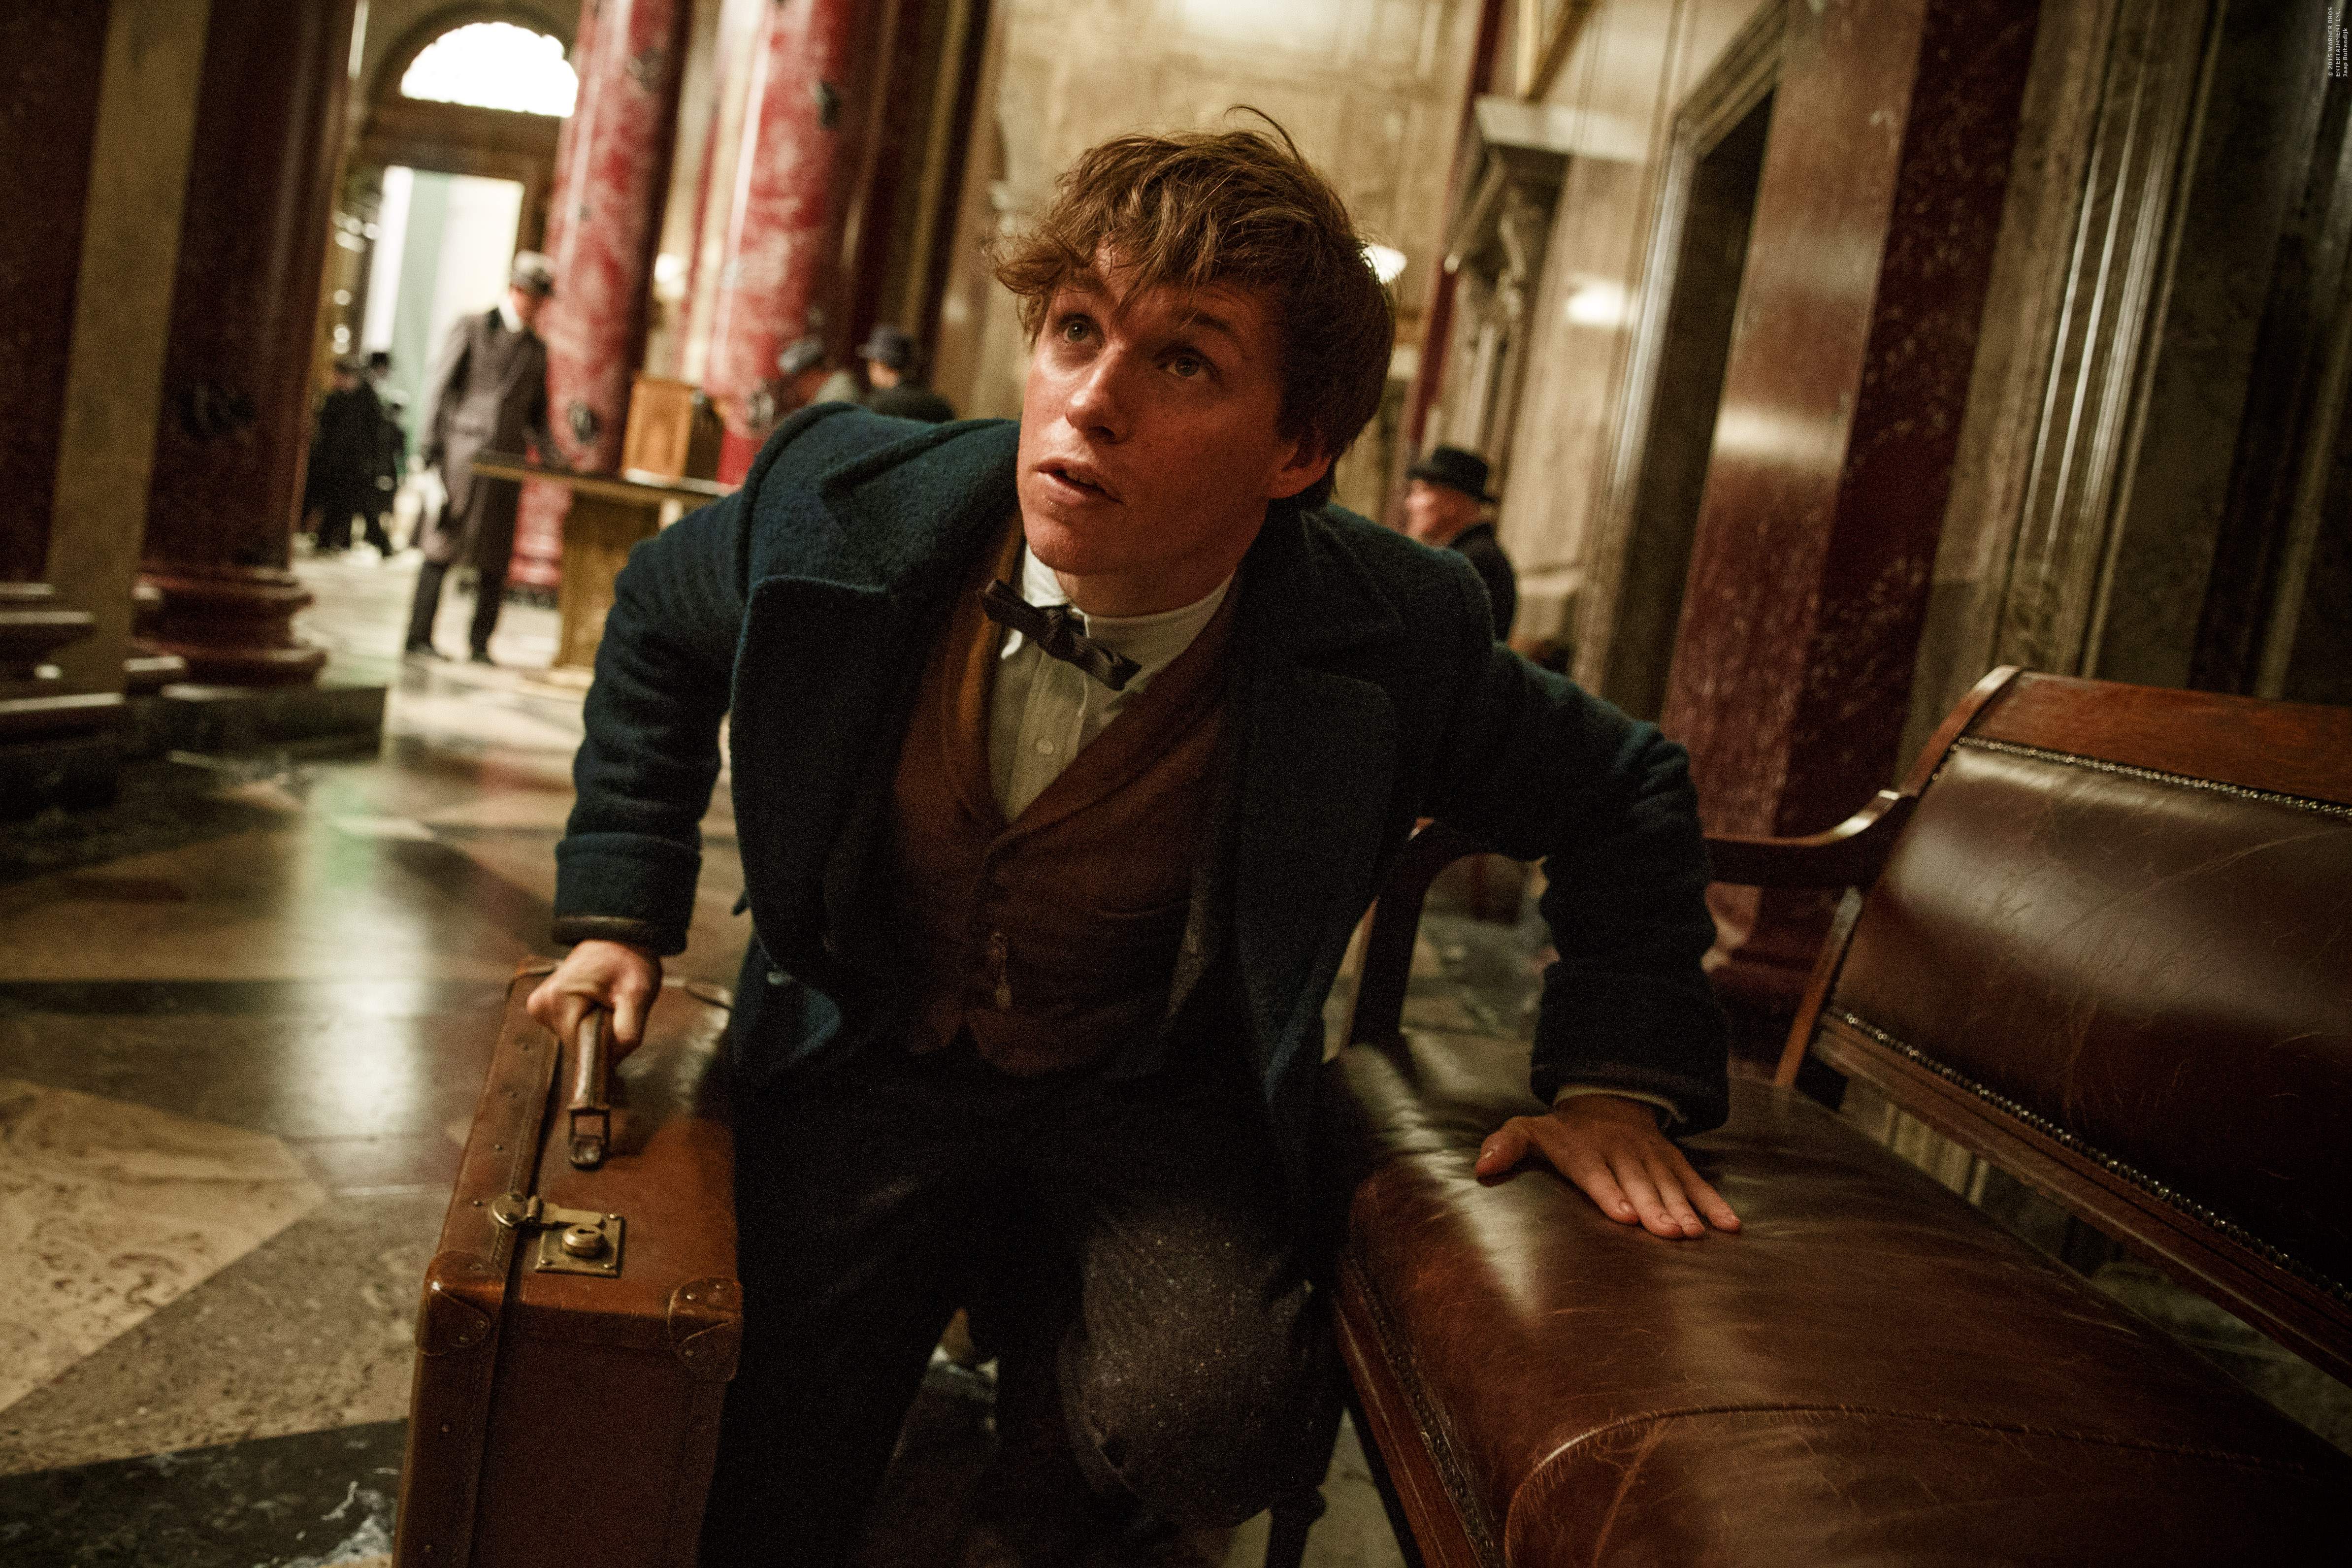 Fantastic Beasts And Where To Find Them Eddie Redmayne Newt Scamander 4776x3184